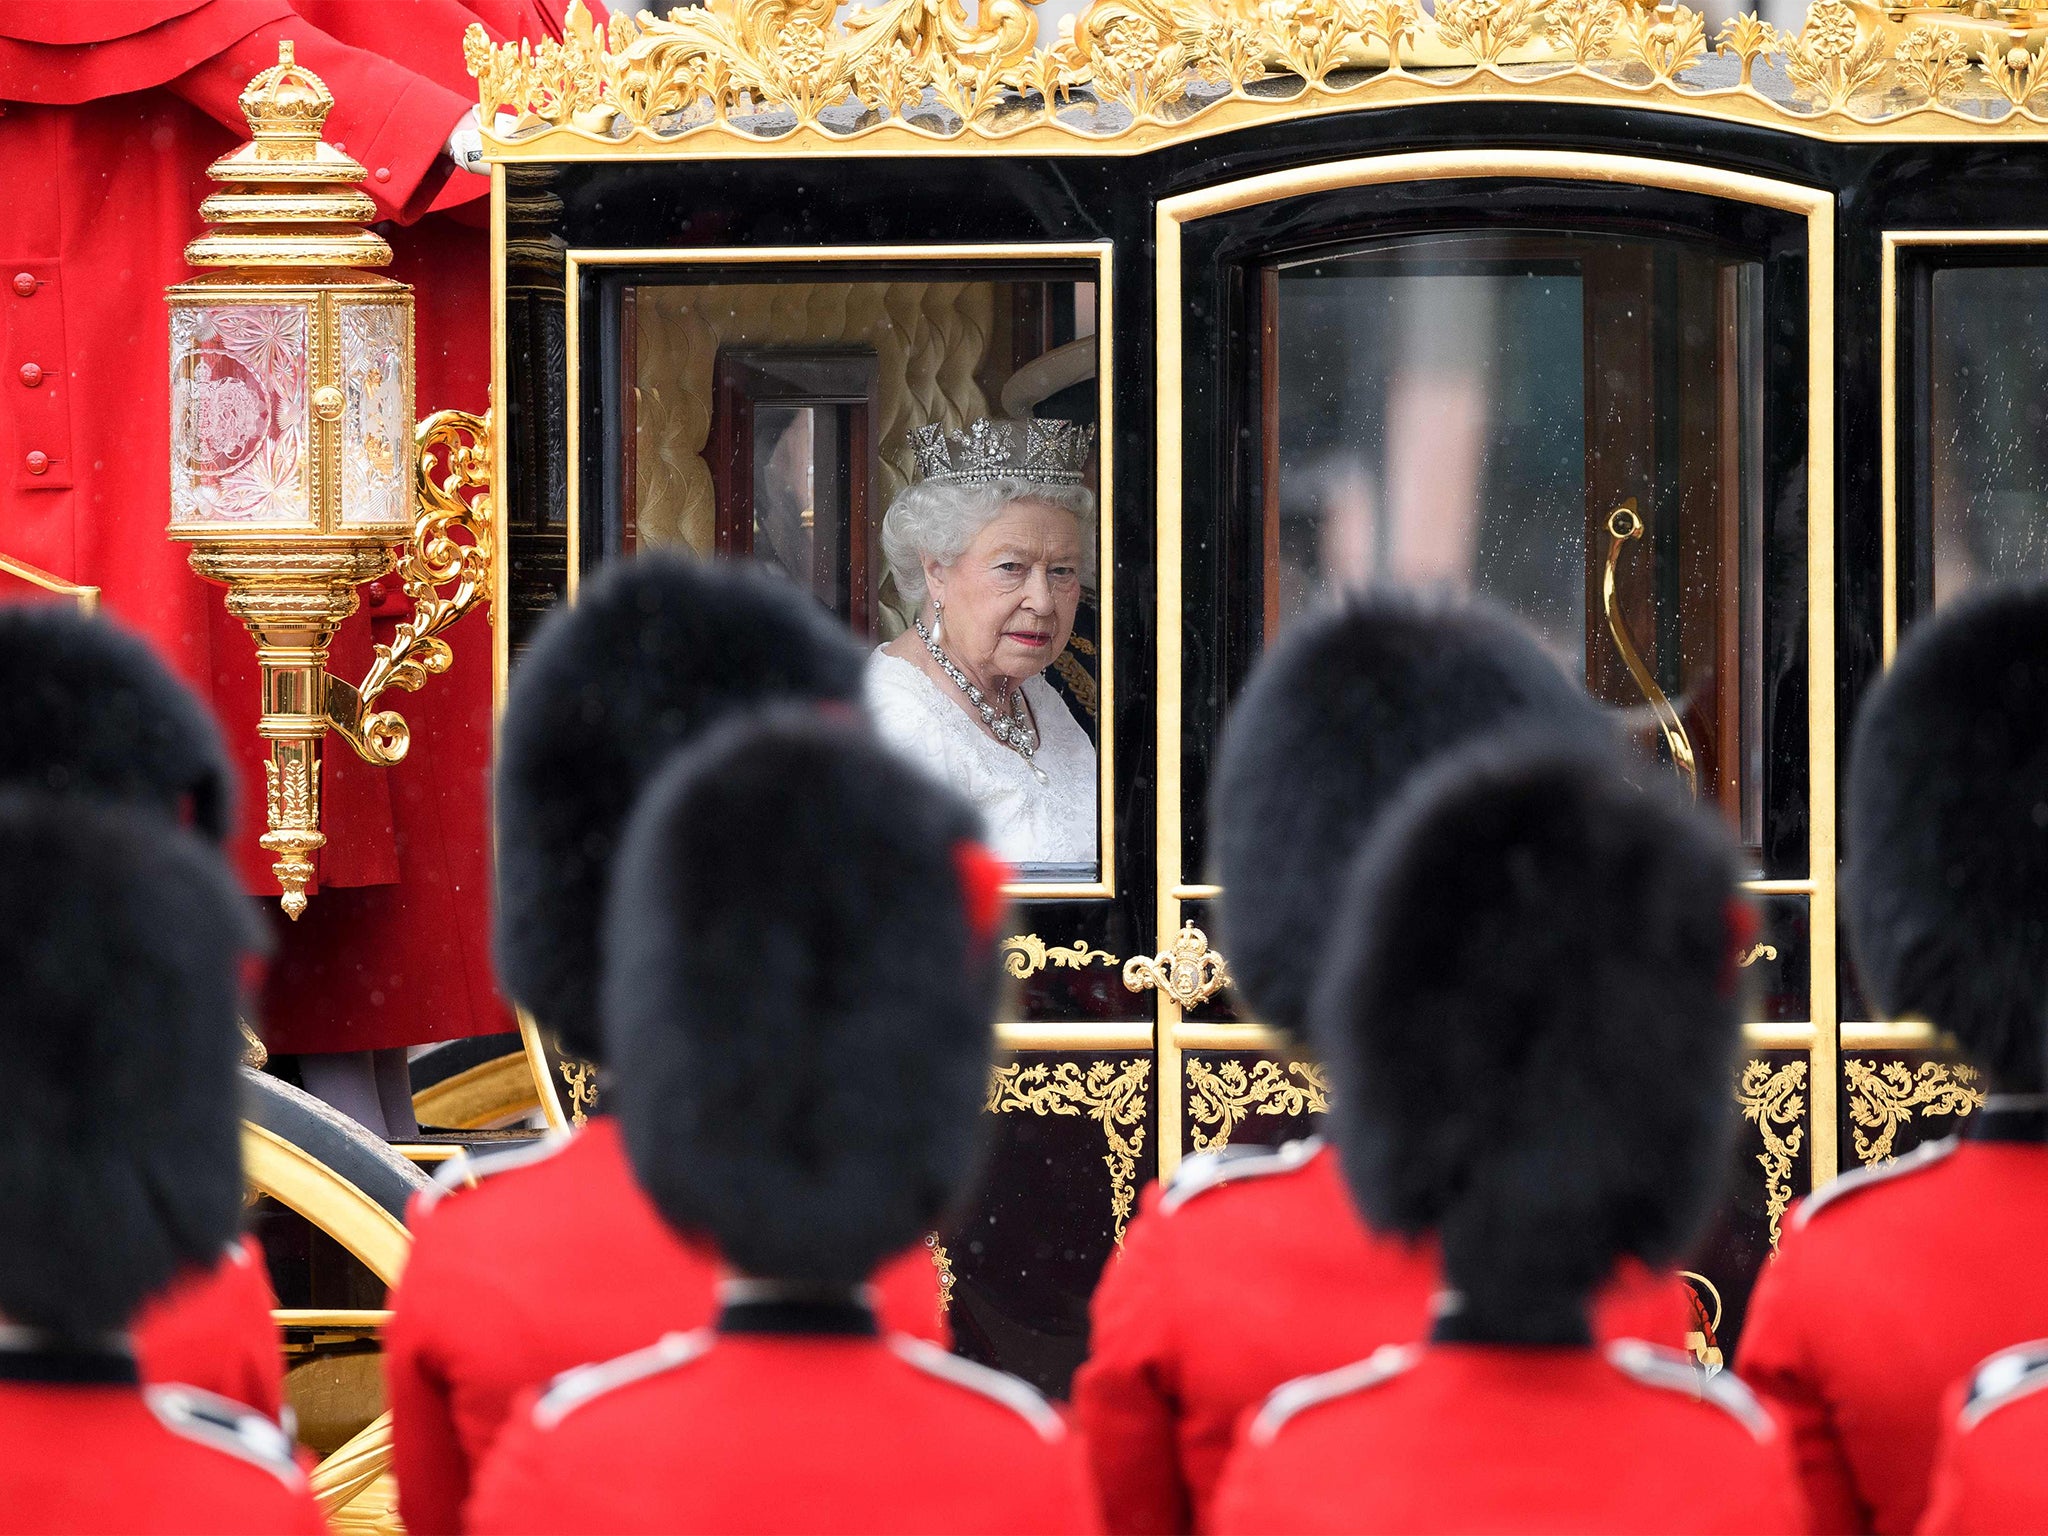 The Queen arrives to deliver her speech to Parliament, setting out the Government's legislative agenda